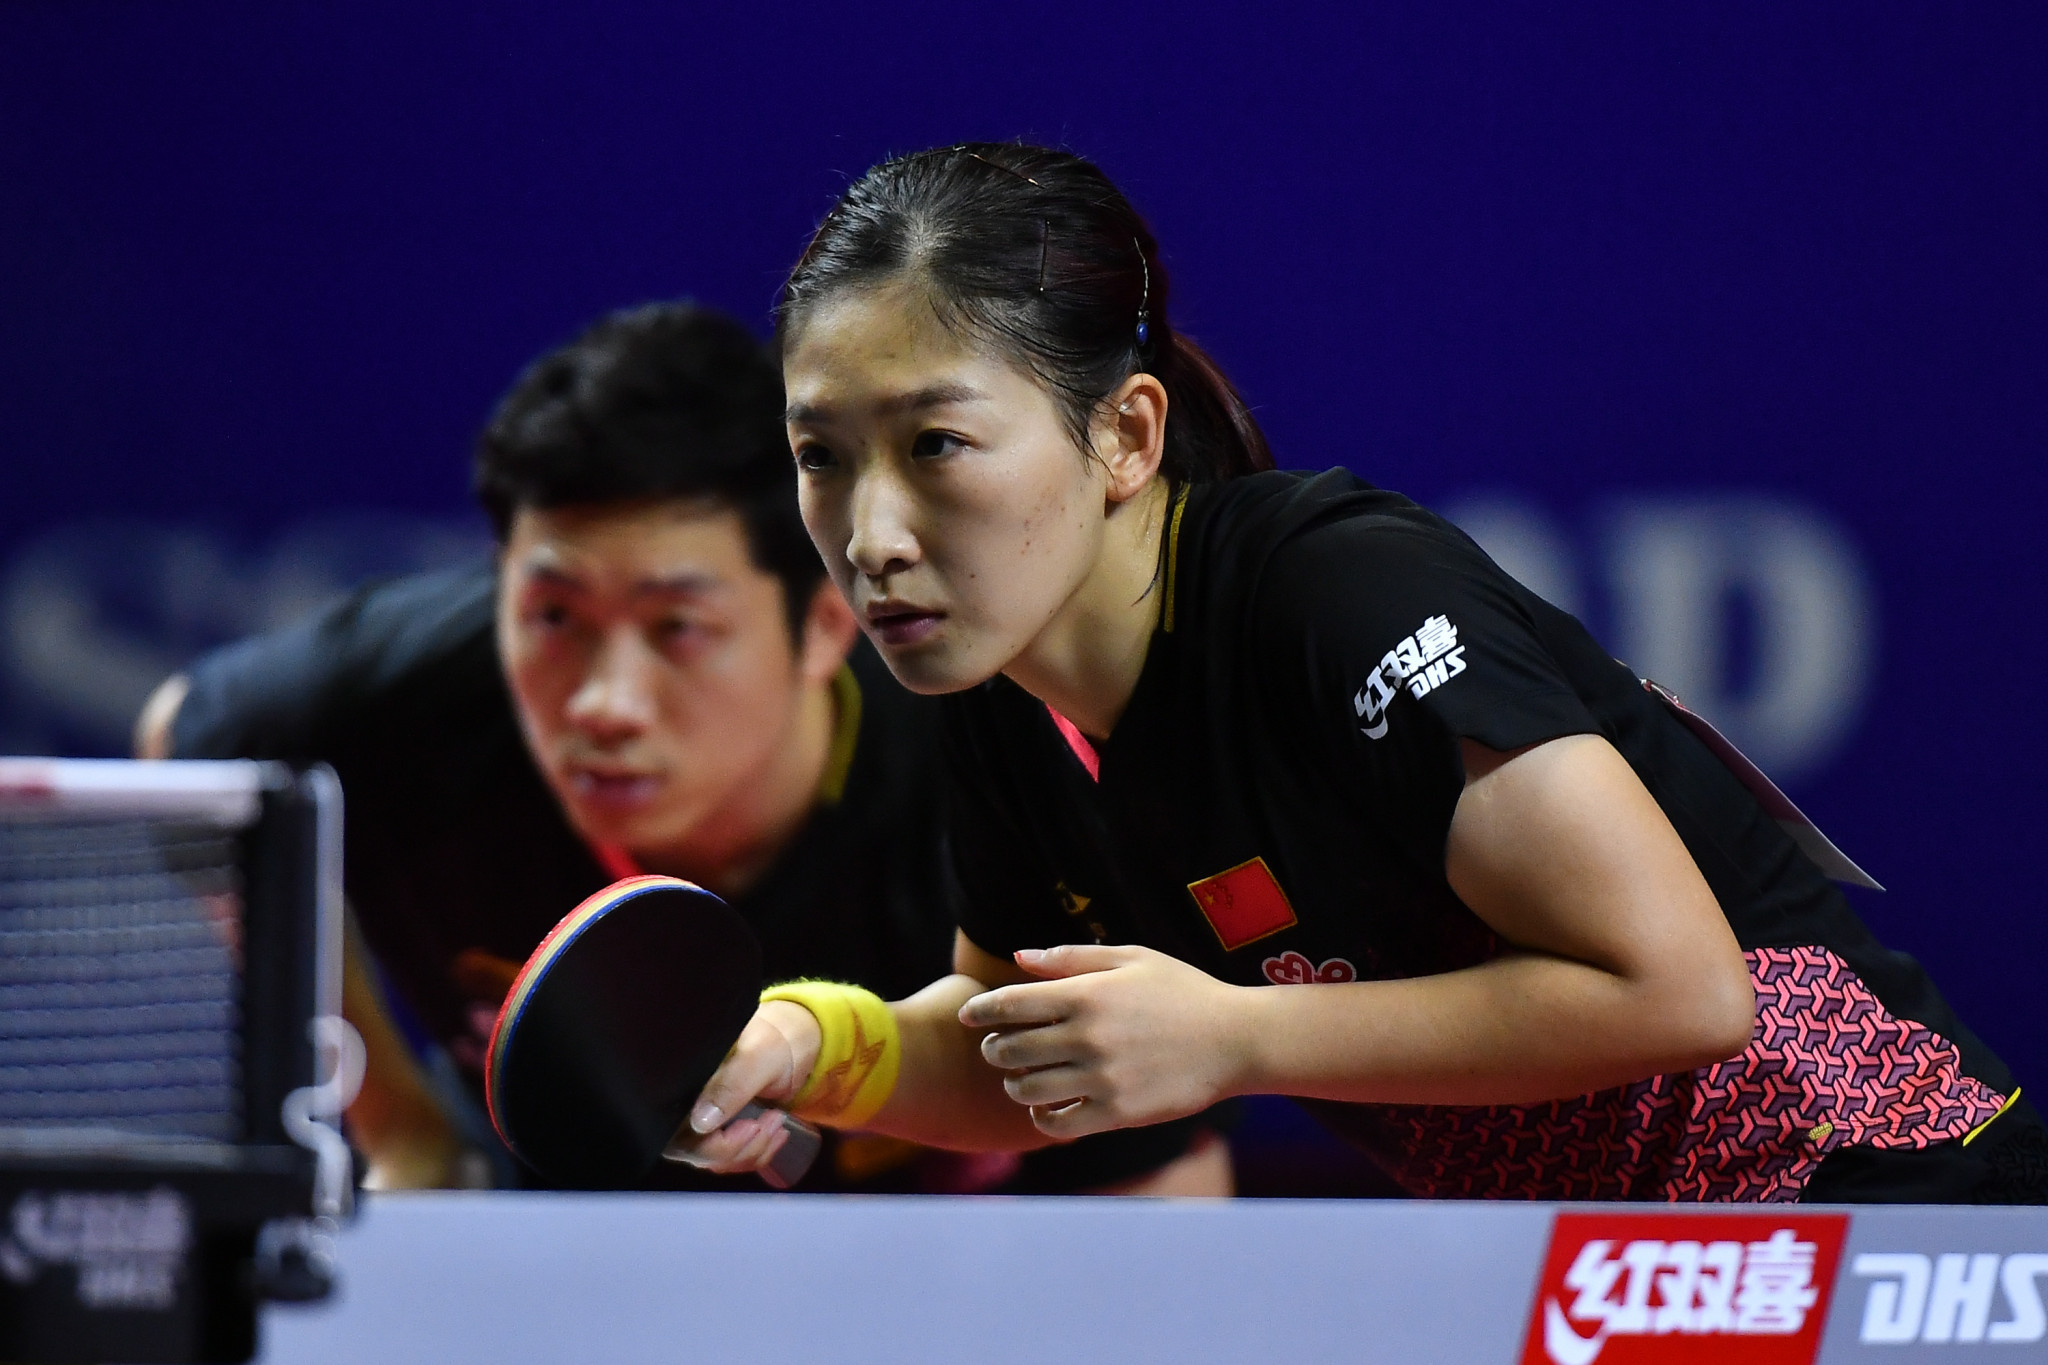 Men's world number one Xu Xin and women's world number two Liu Shiwen won the mixed doubles at the Asian Table Tennis Championships – but results didn't go completely to plan ©Getty Images